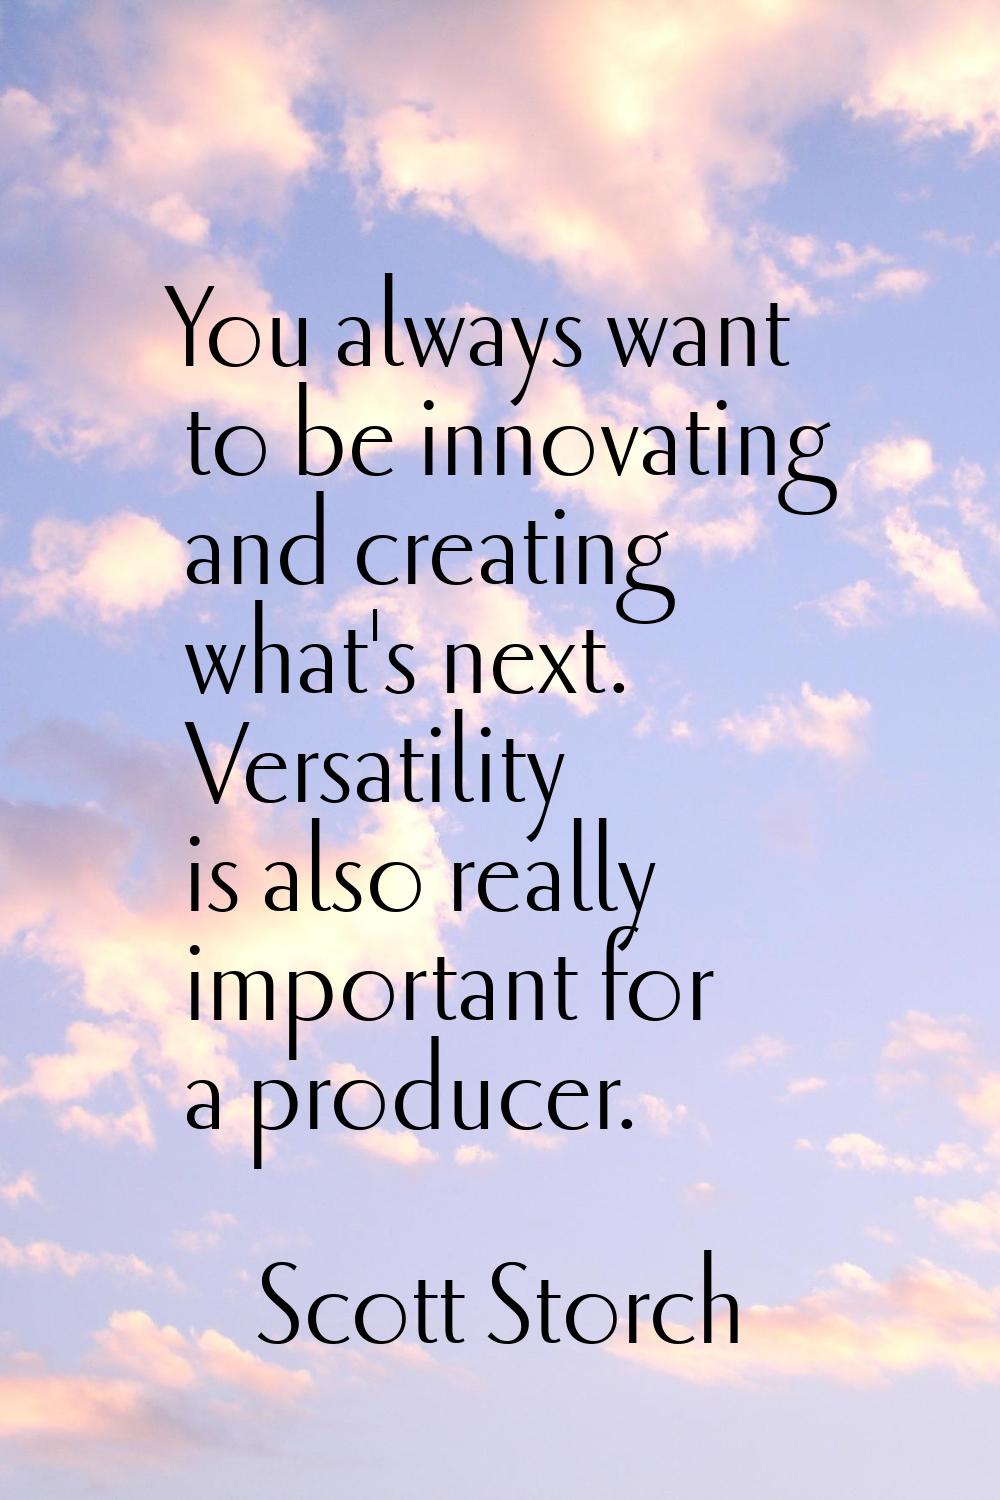 You always want to be innovating and creating what's next. Versatility is also really important for